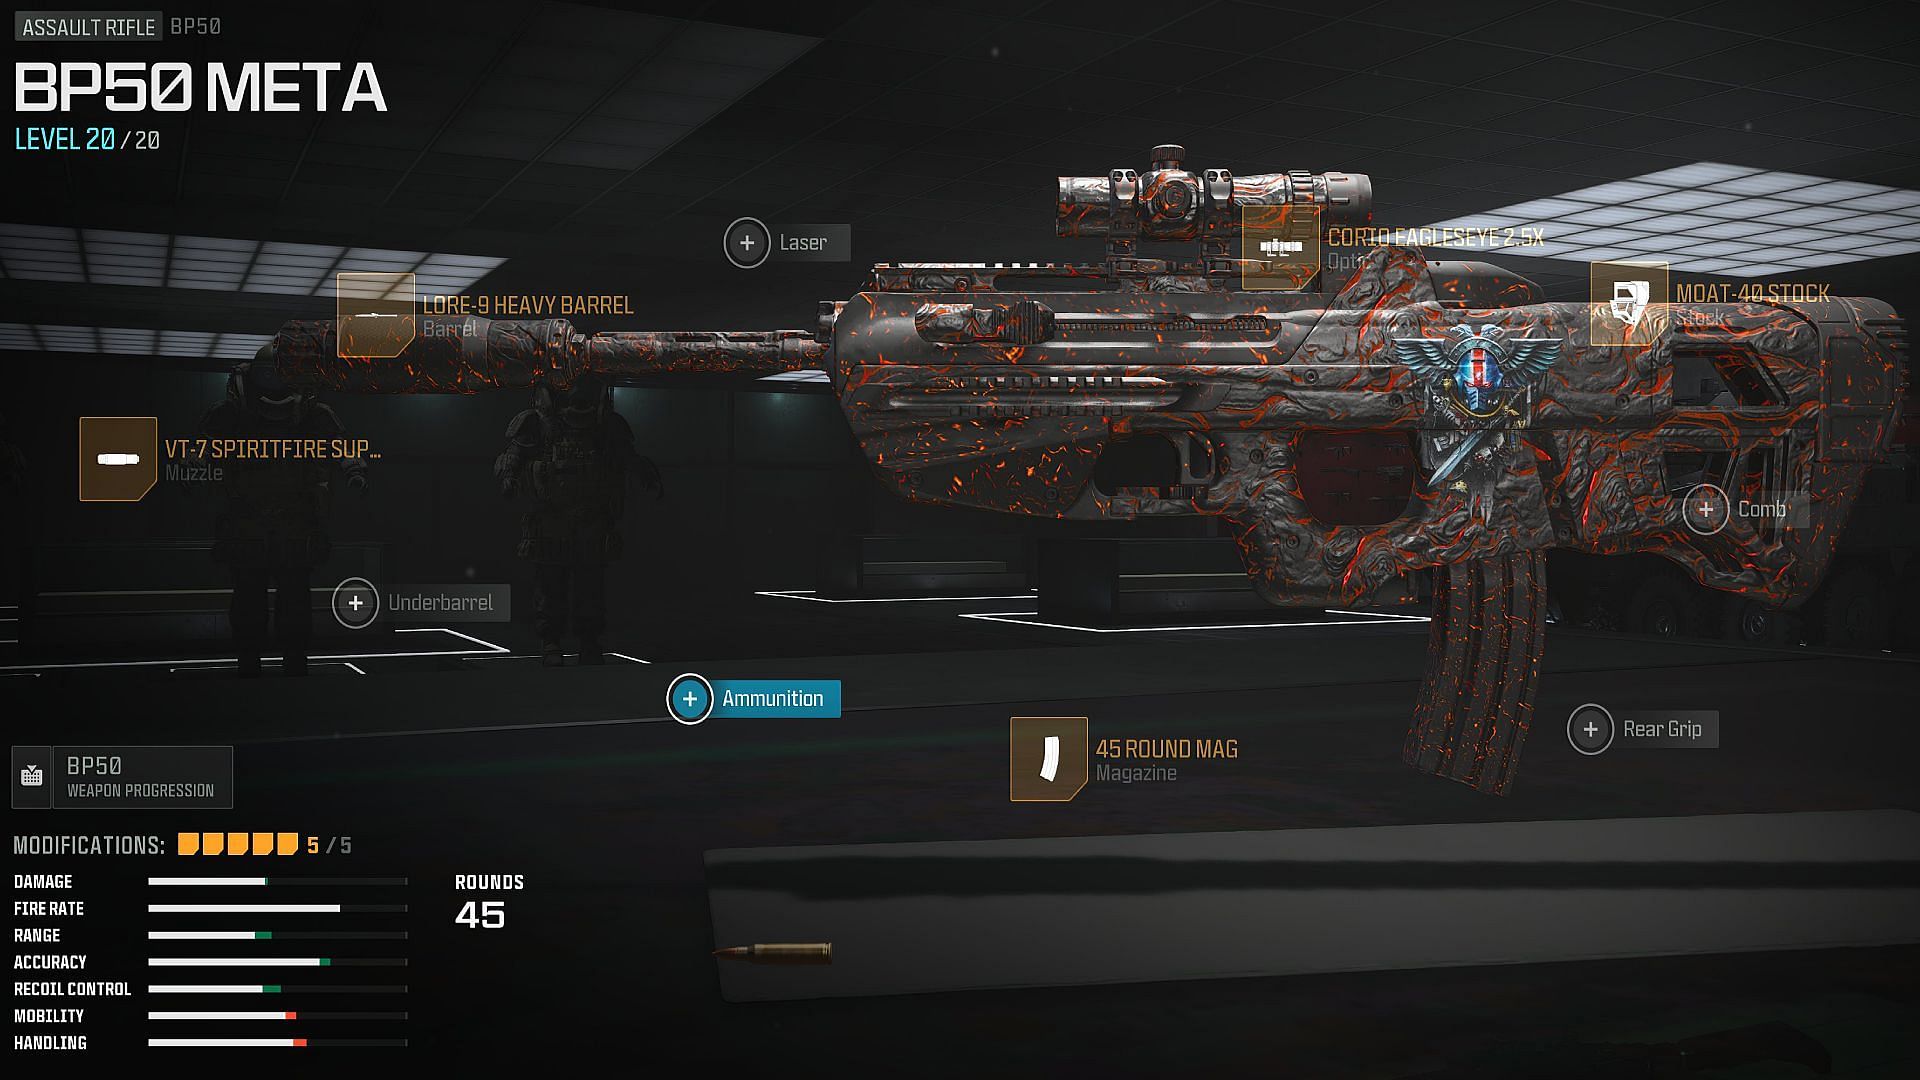 New BP50 zero recoil loadout in Warzone (Image via Activision)